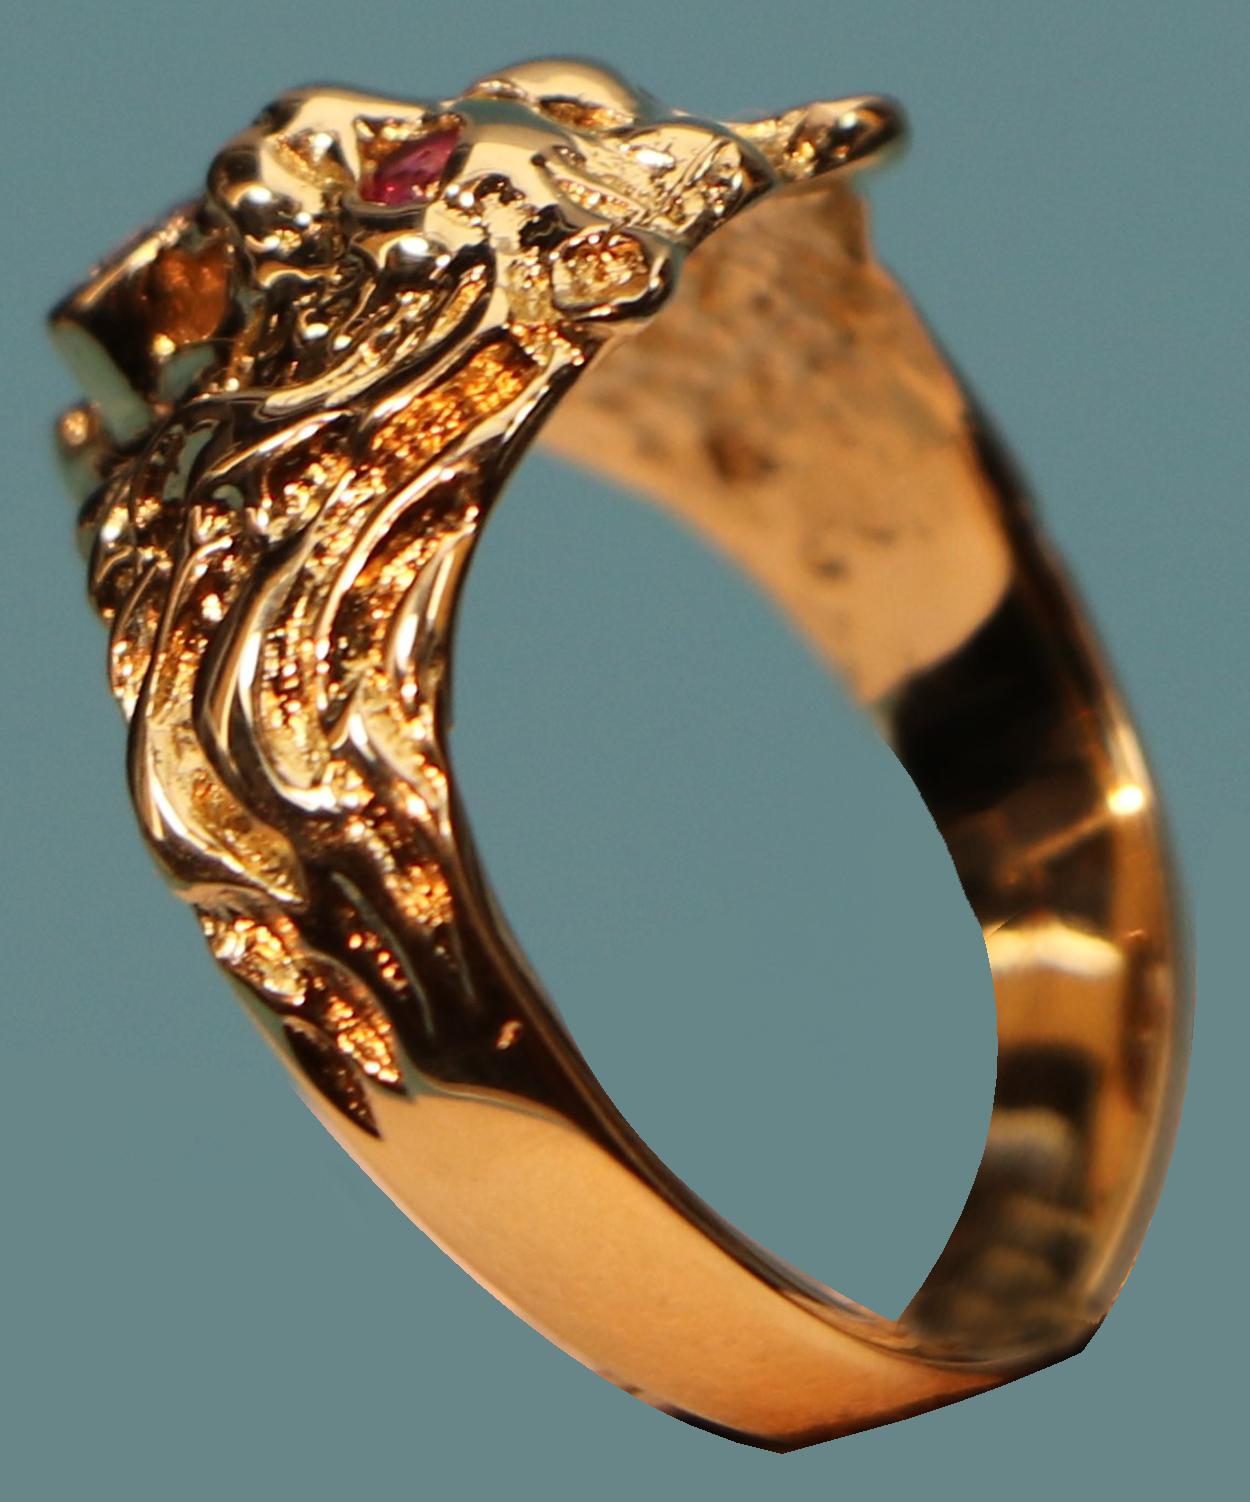 Round Cut Impressive Lion Head Ring, Lions Ring, Made of 585 Gold, Diamond and Rubies For Sale